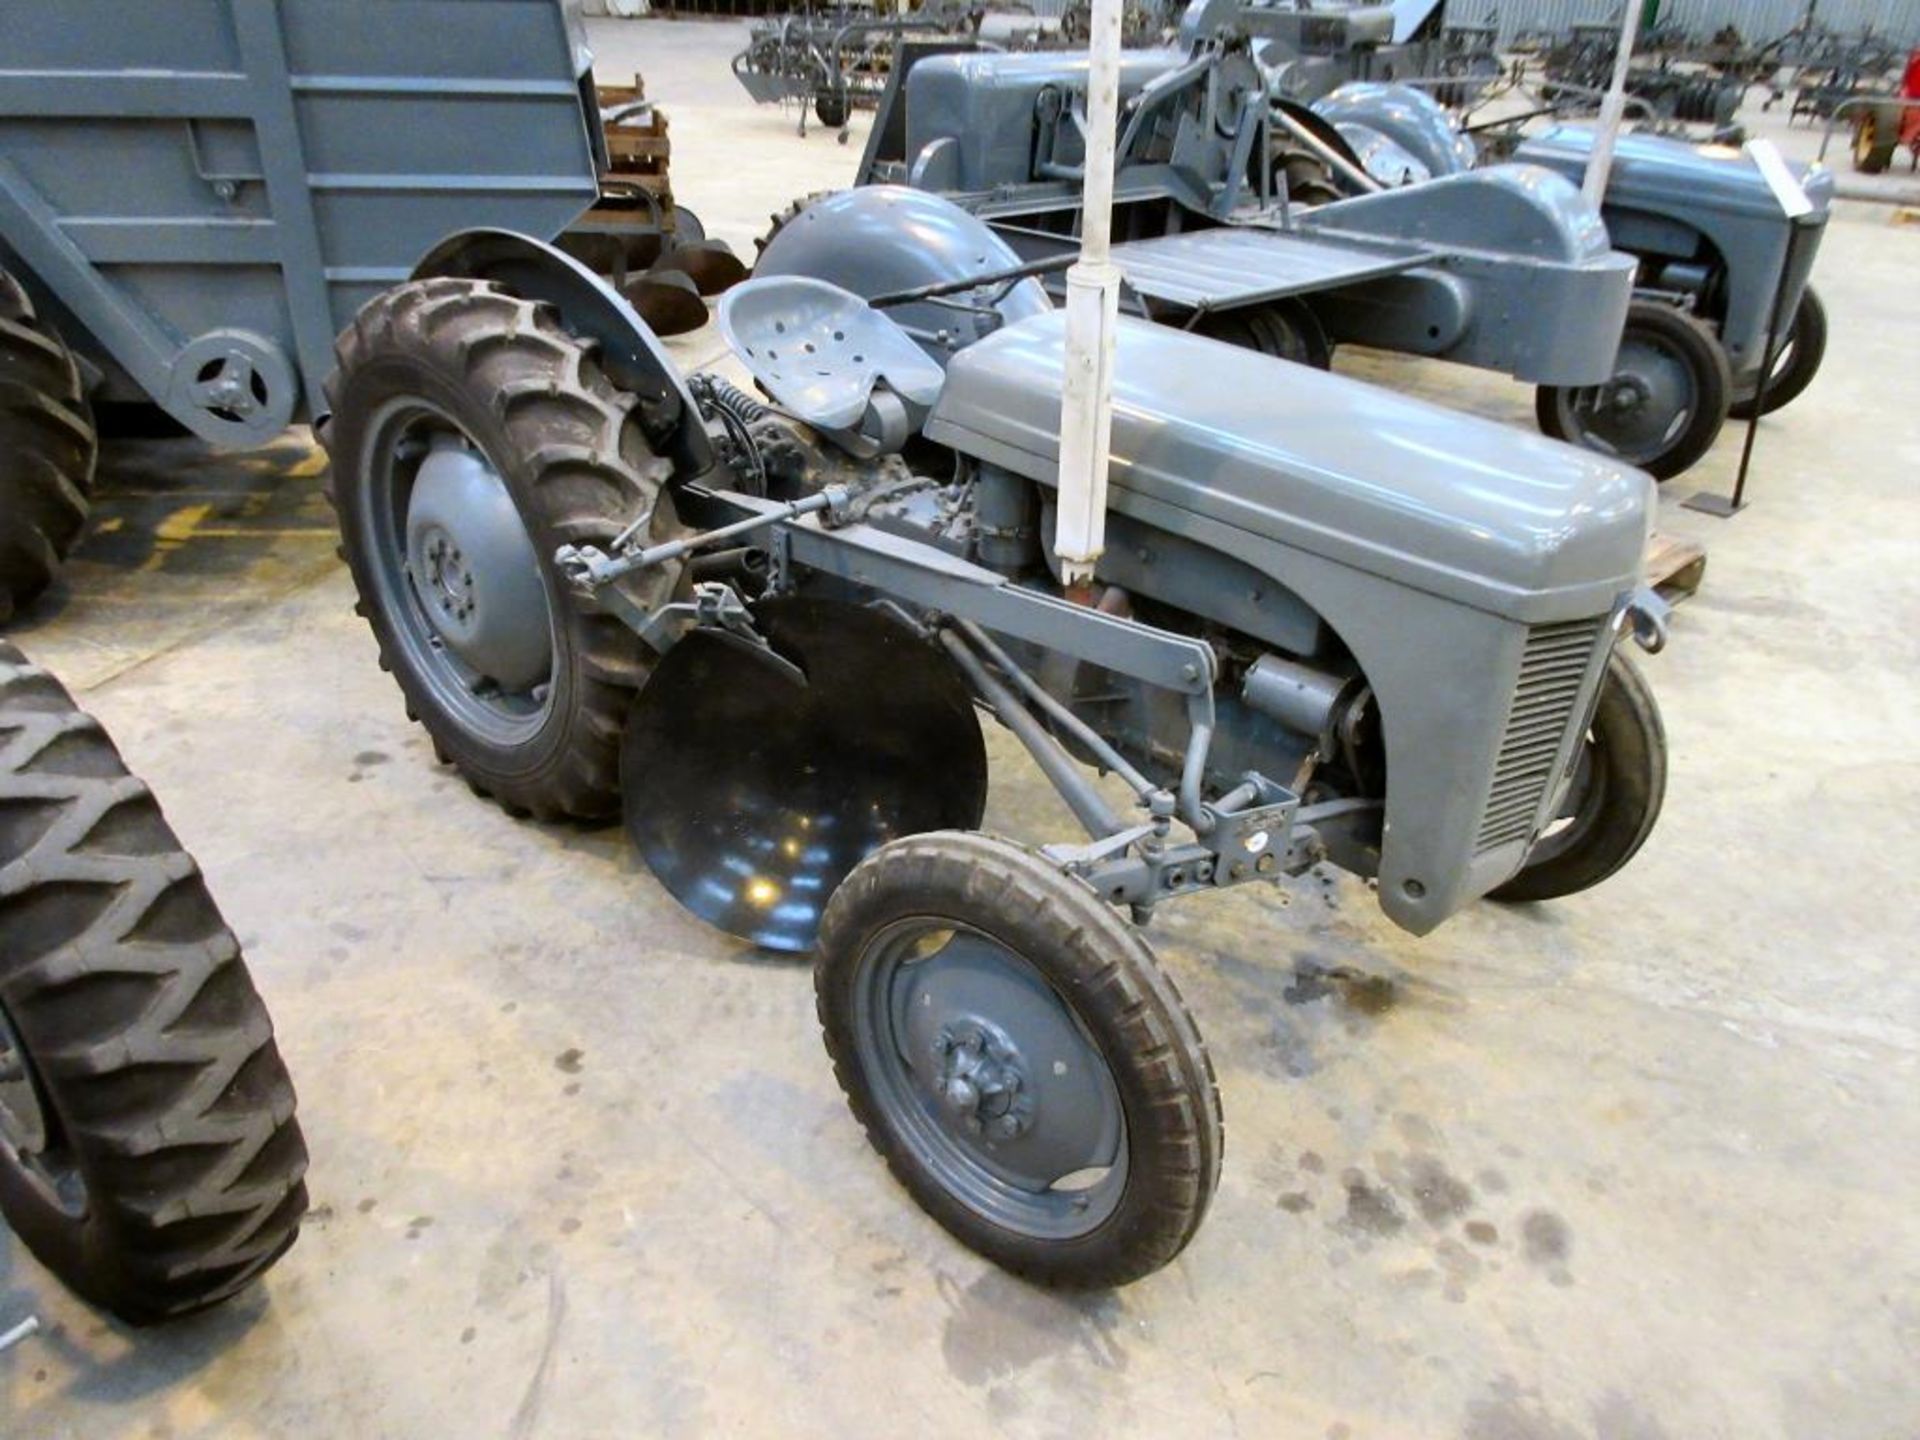 1950 FERGUSON TE-D20 4cylinder petrol/paraffin TRACTOR Reg No: 472 XUA Serial No: TED141665 Fitted